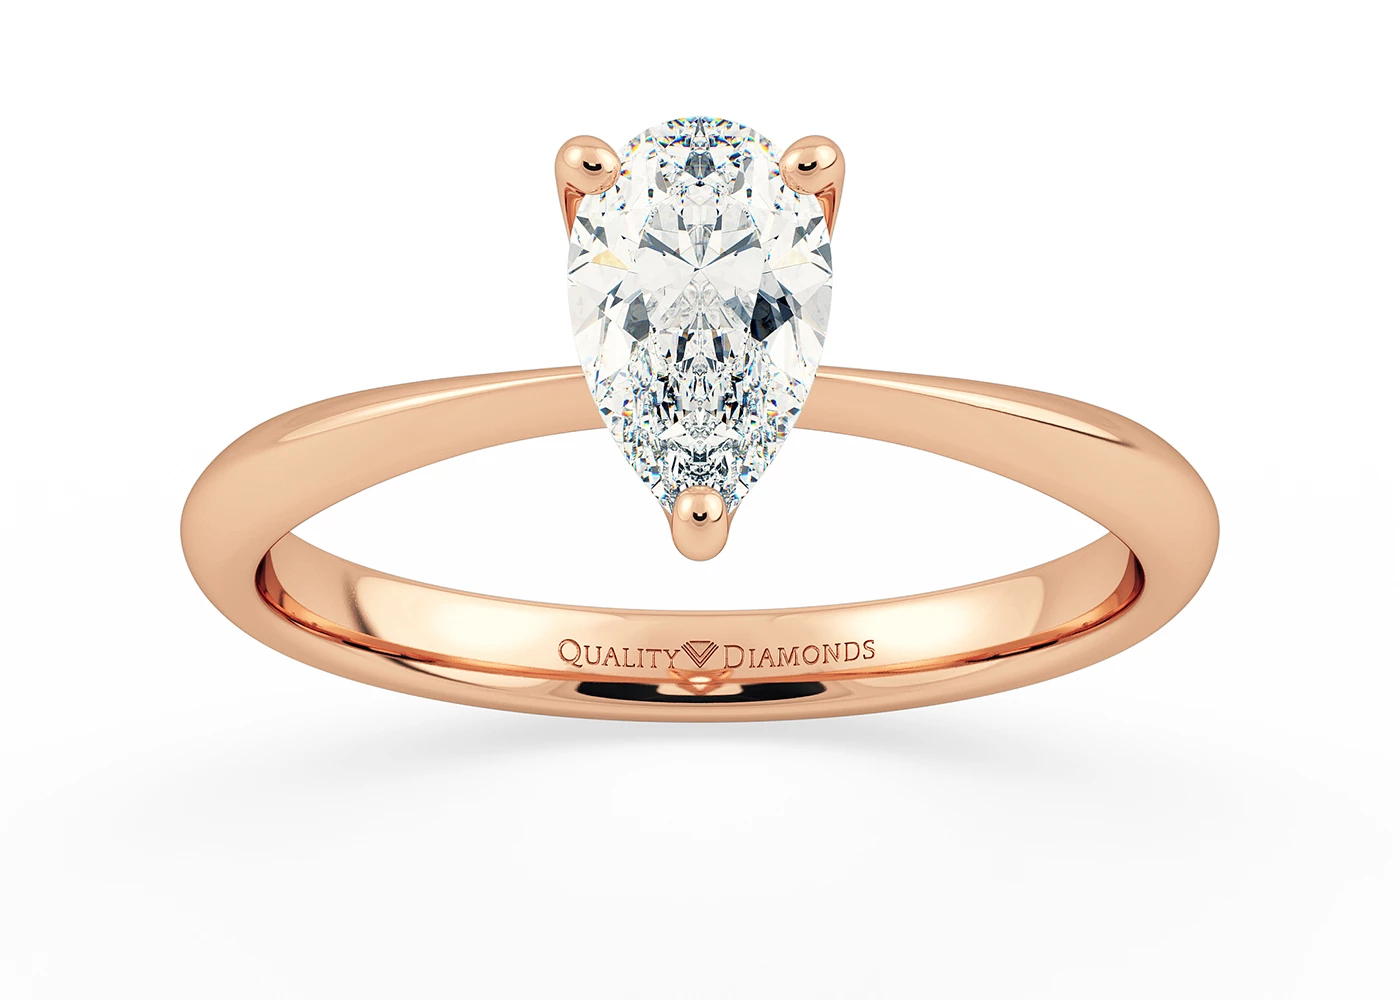 Two Carat Pear Solitaire Diamond Engagement Ring in 18K Rose Gold